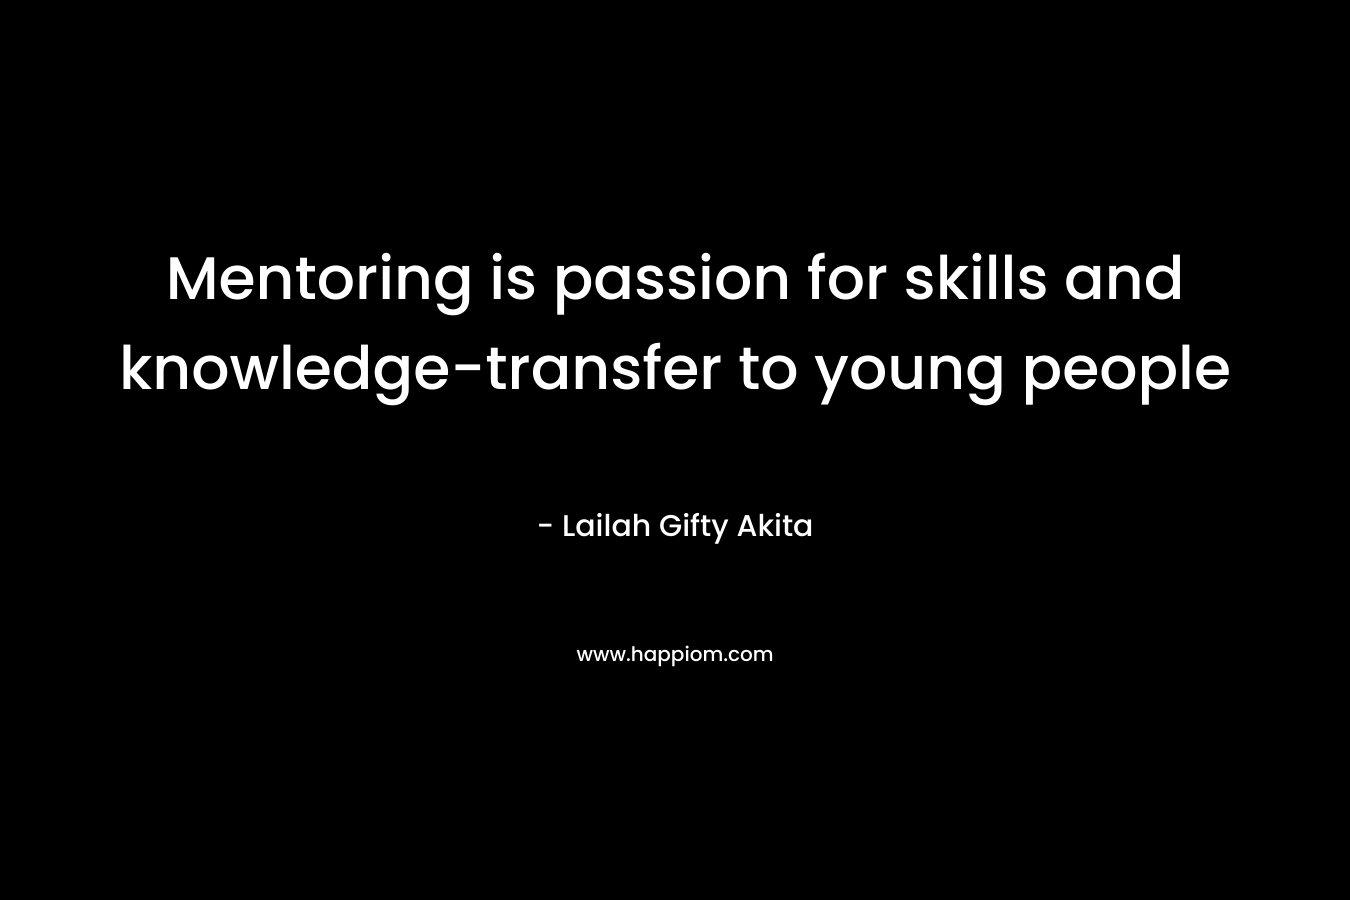 Mentoring is passion for skills and knowledge-transfer to young people – Lailah Gifty Akita